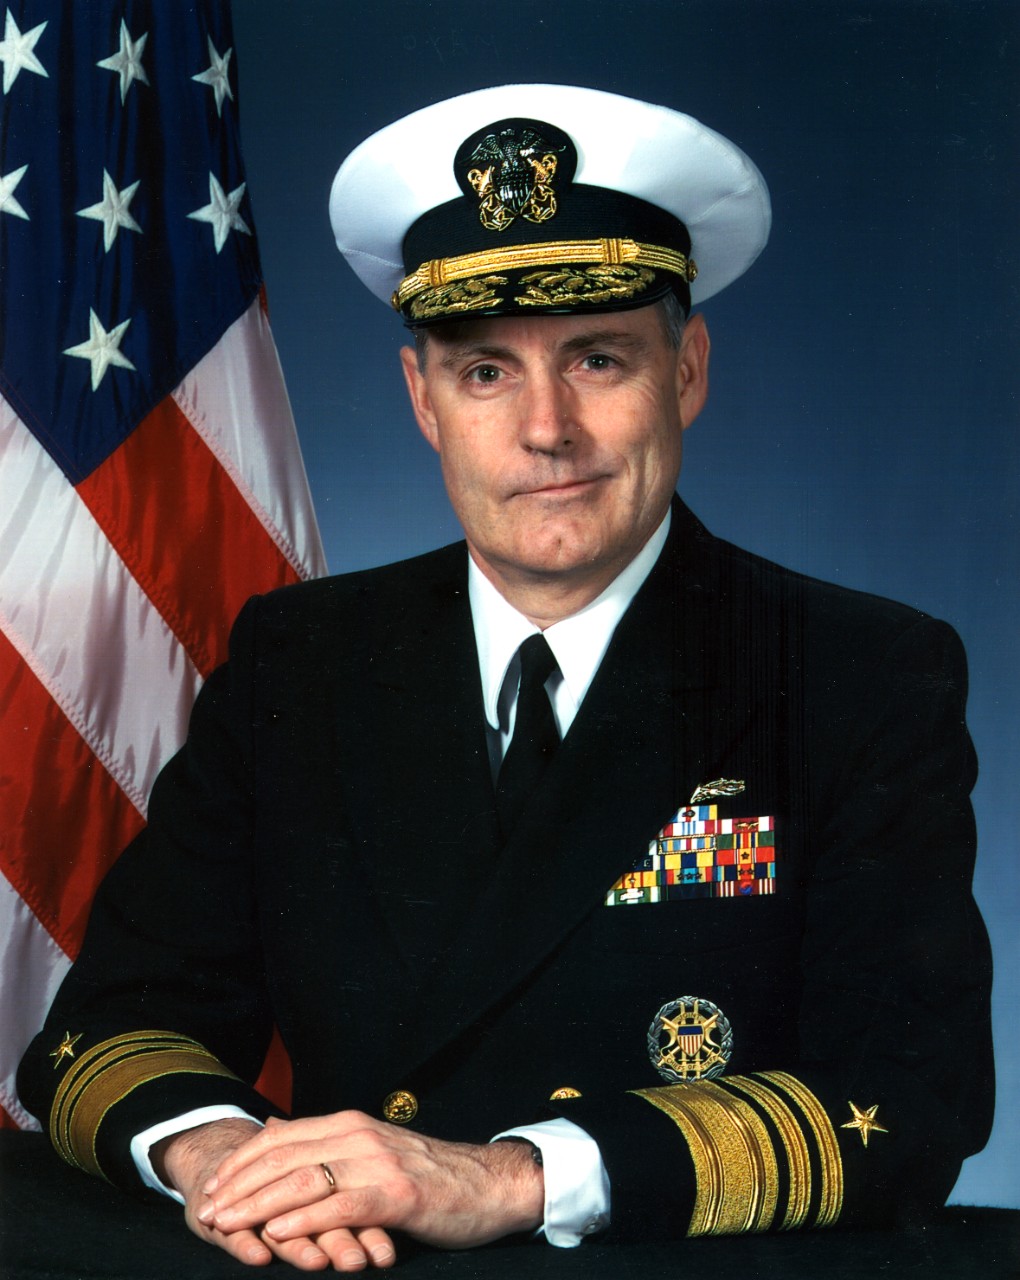 <p>L38-56.06.02 VADM Richard Mayo</p><div style="left: -10000px; top: 0px; width: 9000px; height: 16px; overflow: hidden; position: absolute;"><div>&nbsp;</div></div>